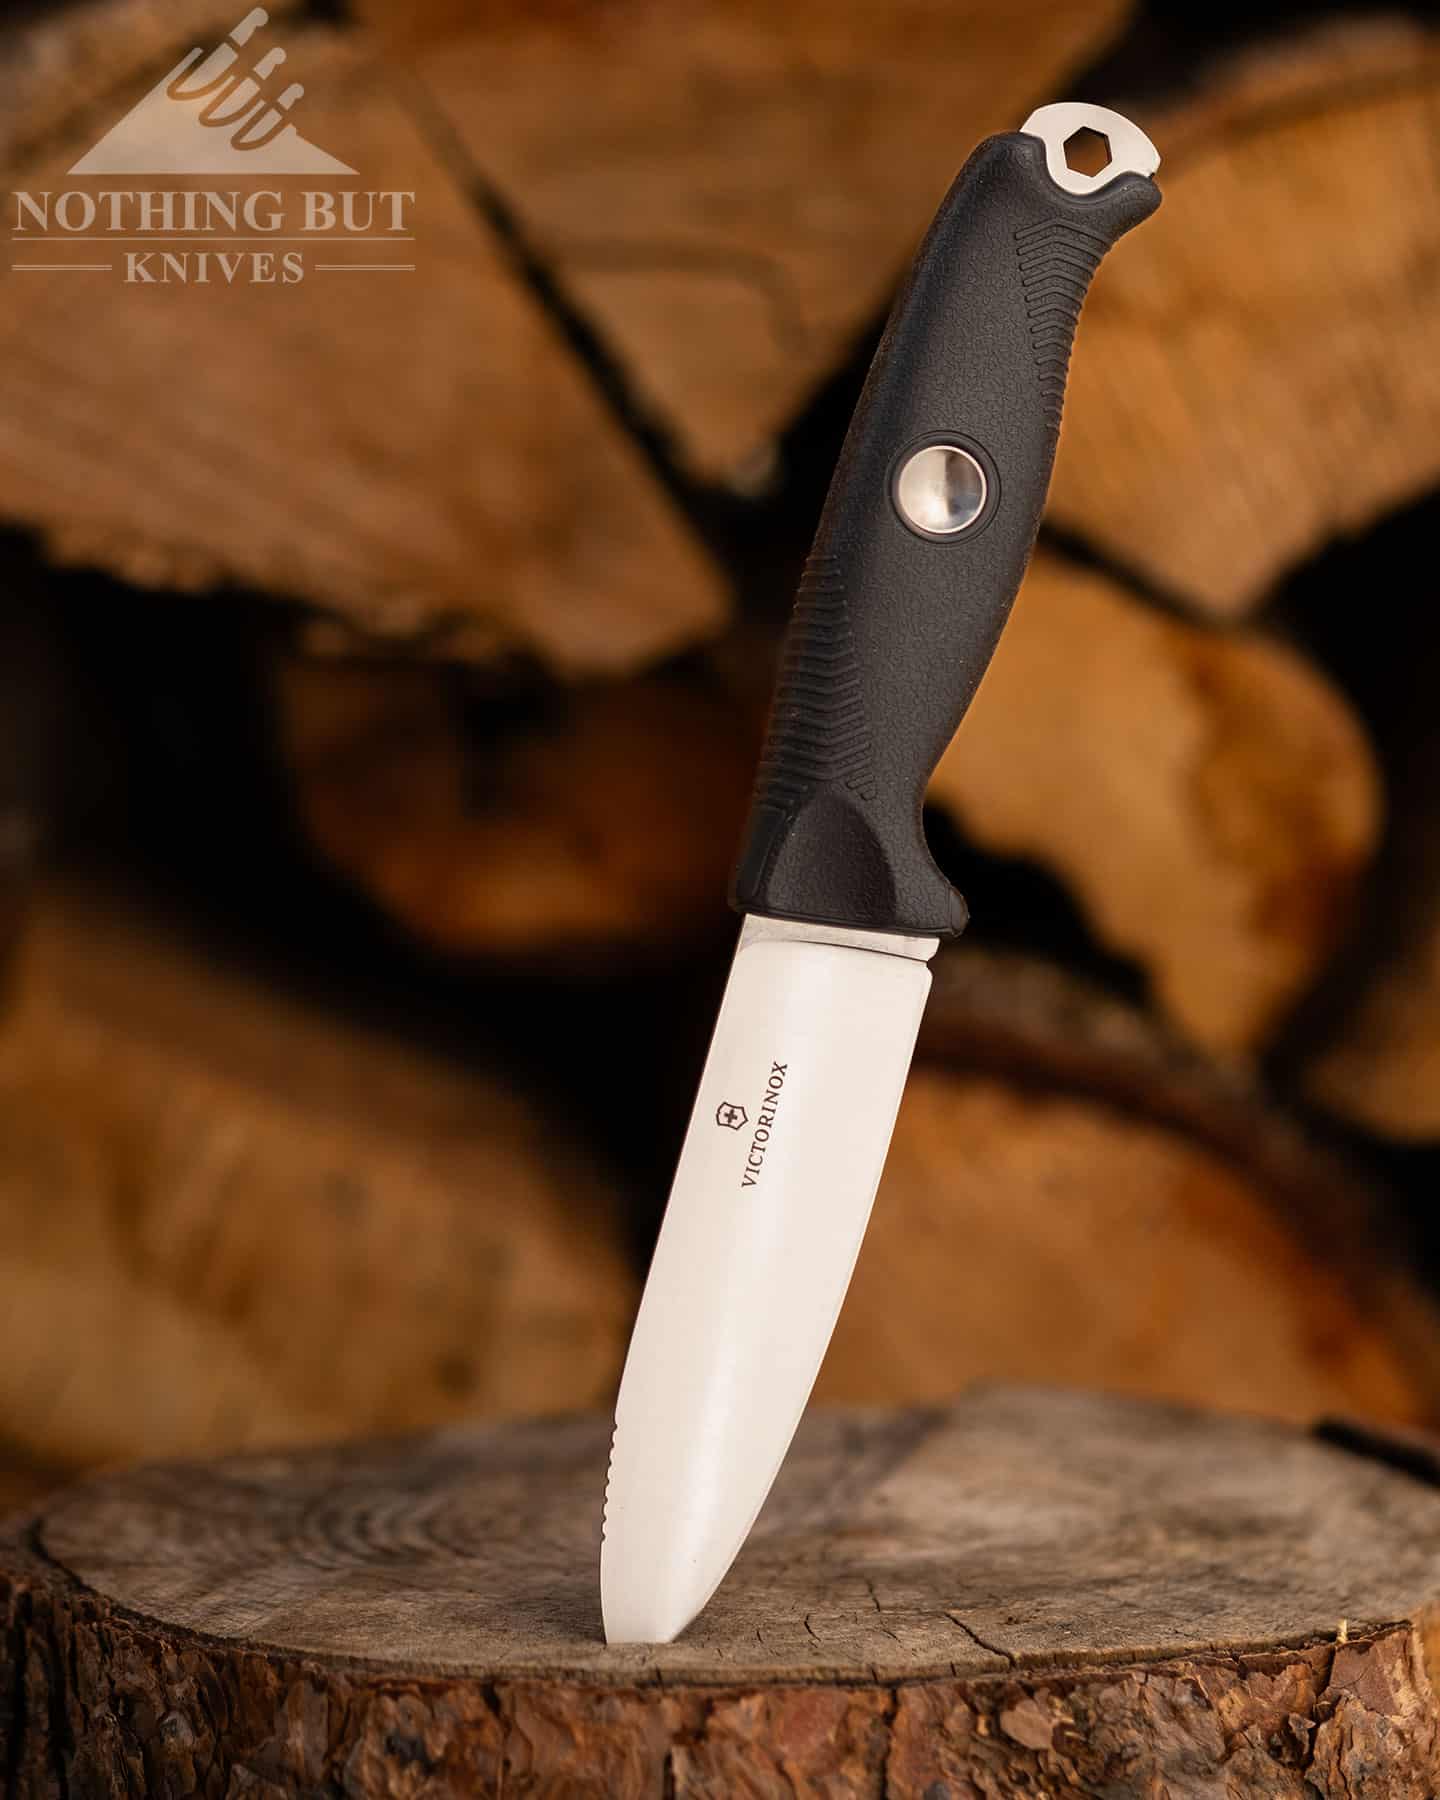 The Victorinox Venture Pro was released in 2023, and it quickly became one of the most popular bushcraft knives on the market.